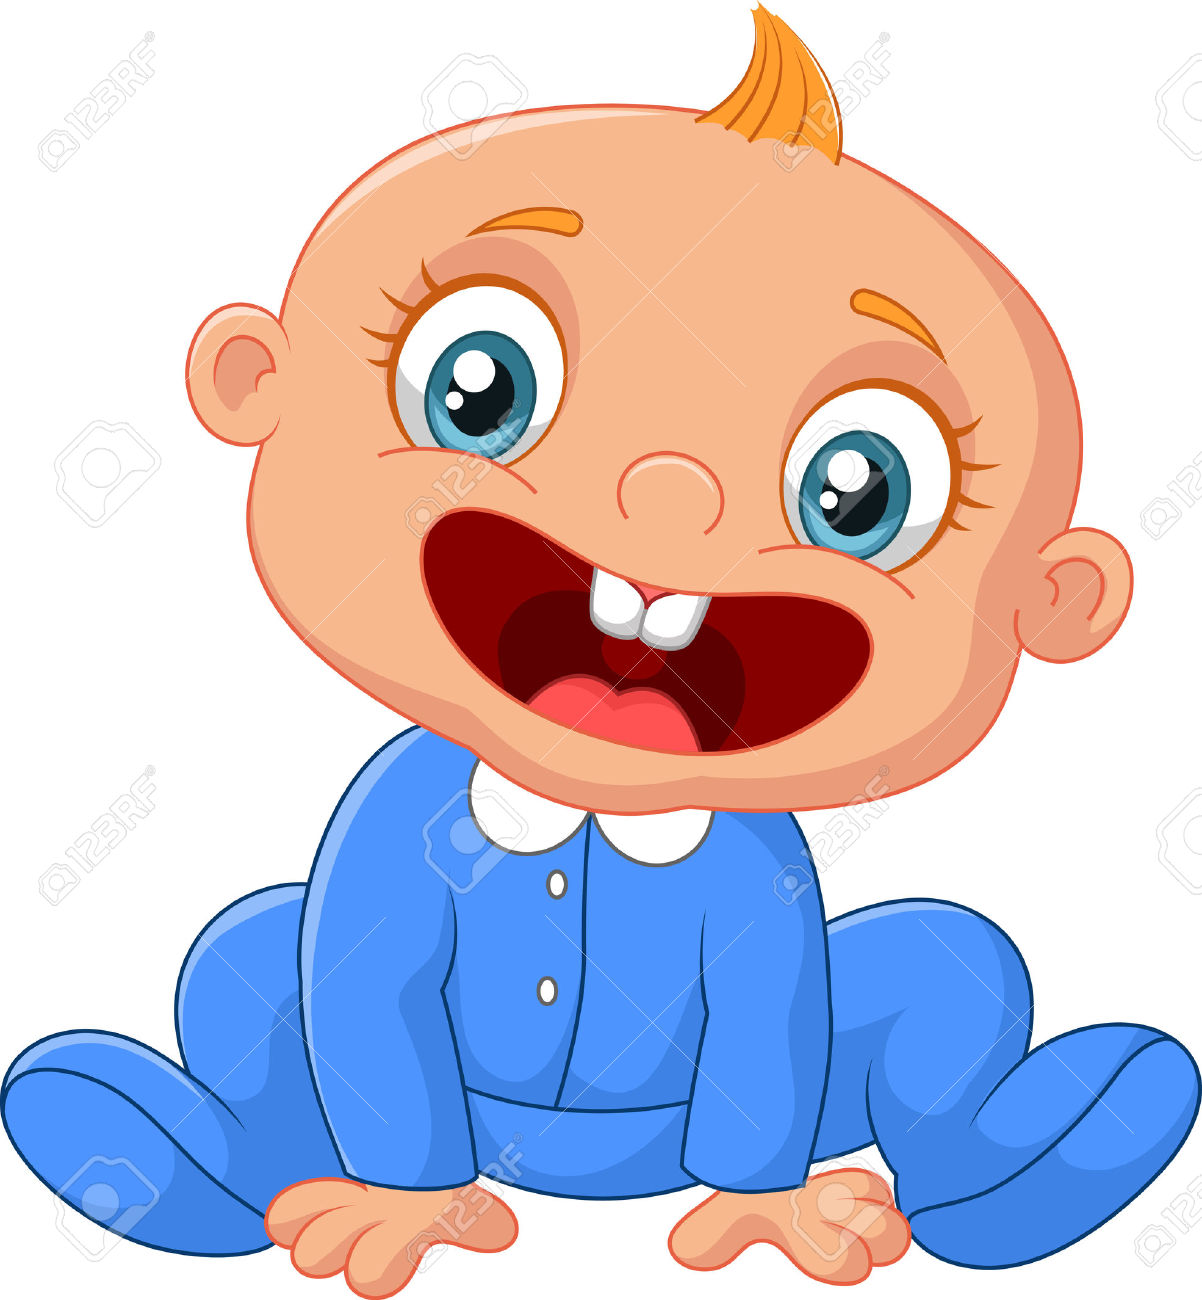 baby laughing clipart - photo #9